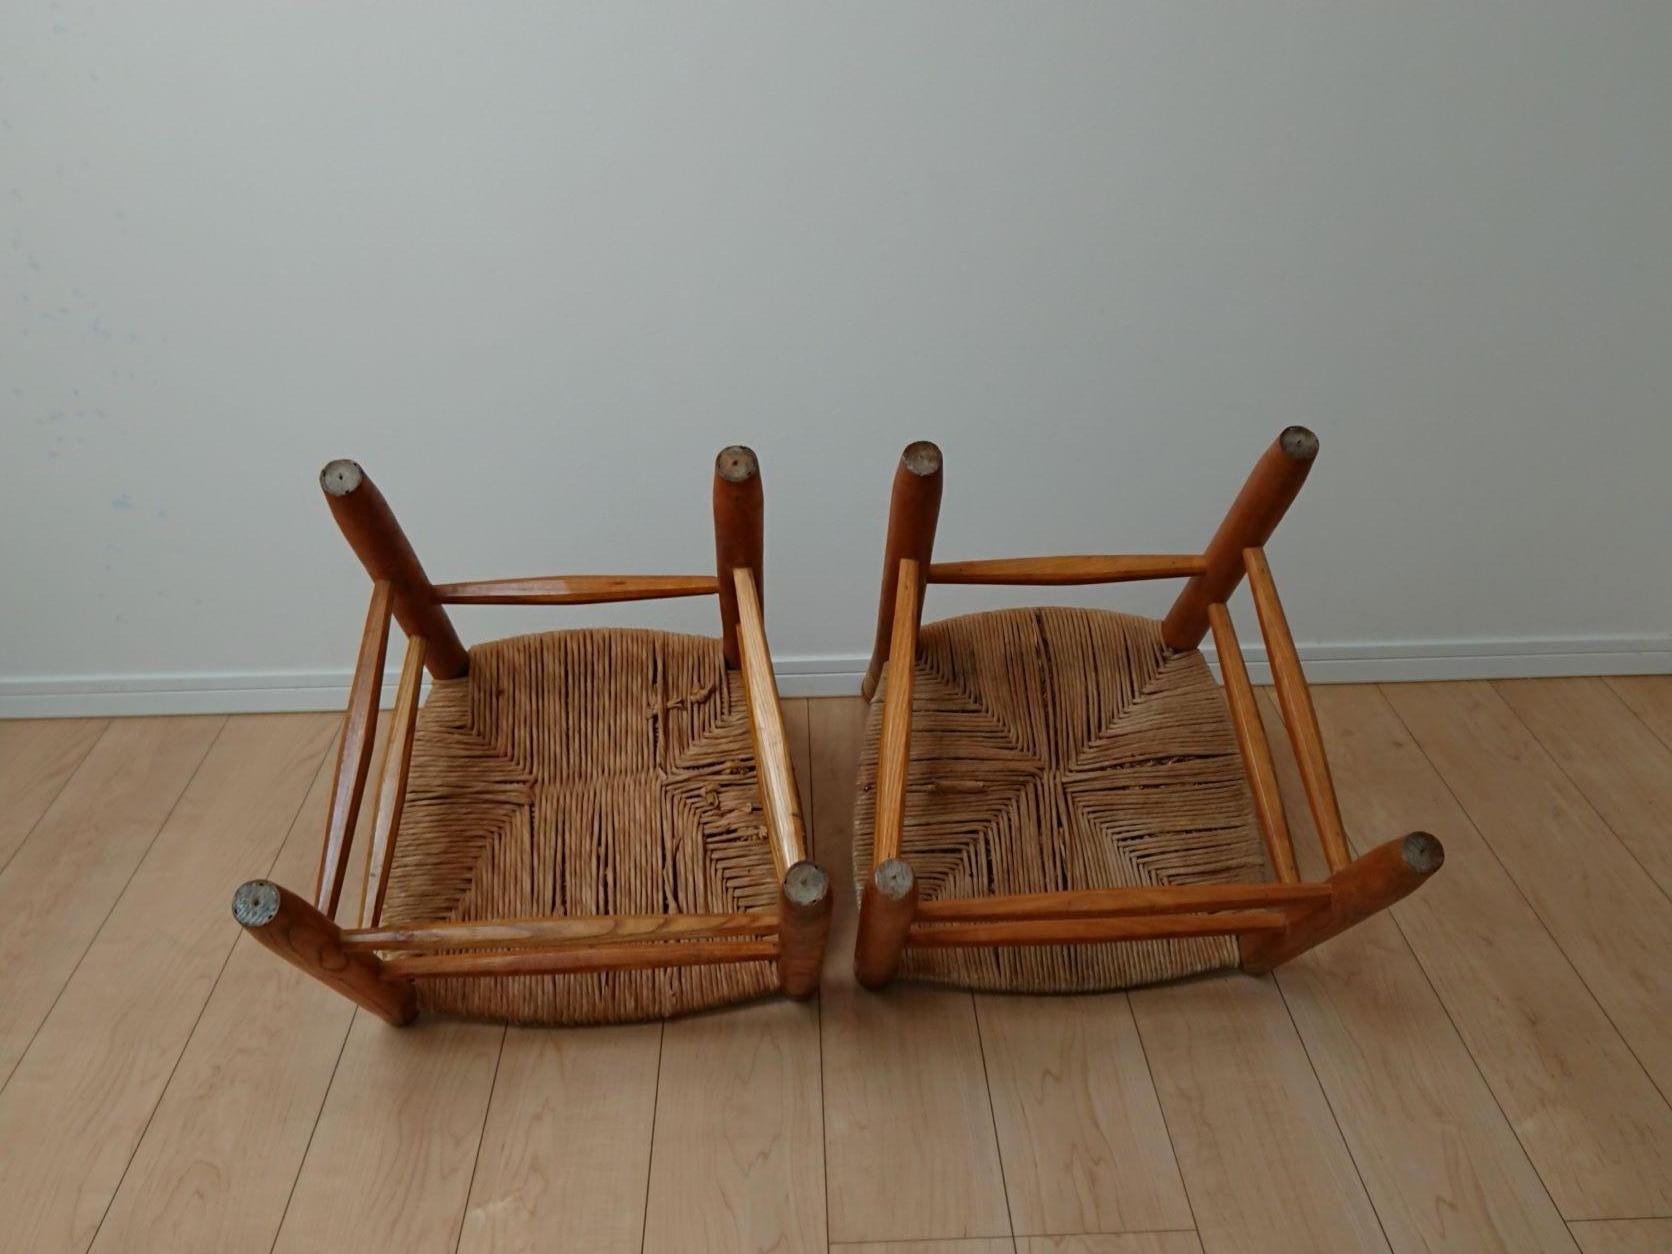 20th Century Solid Wood Side Chairs N゜19 ‘’ Bauche’’ from Bcb, Designed by Perriand 'Pair' For Sale